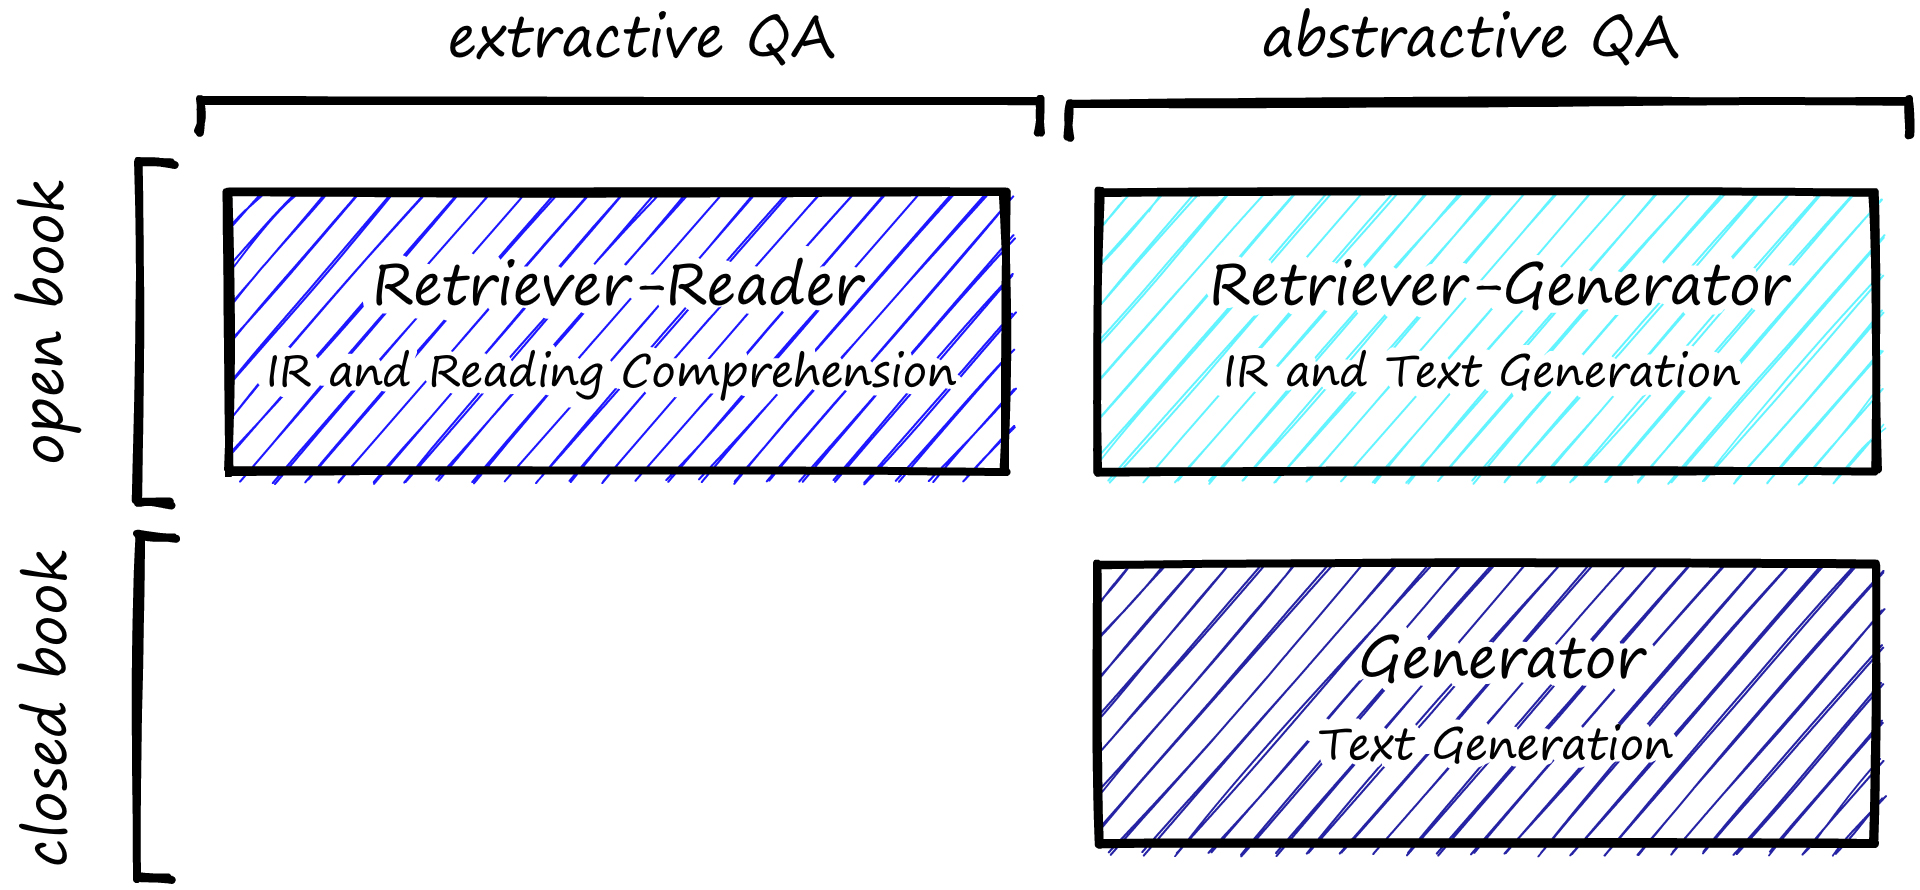 There are a few approaches to question answering (QA).